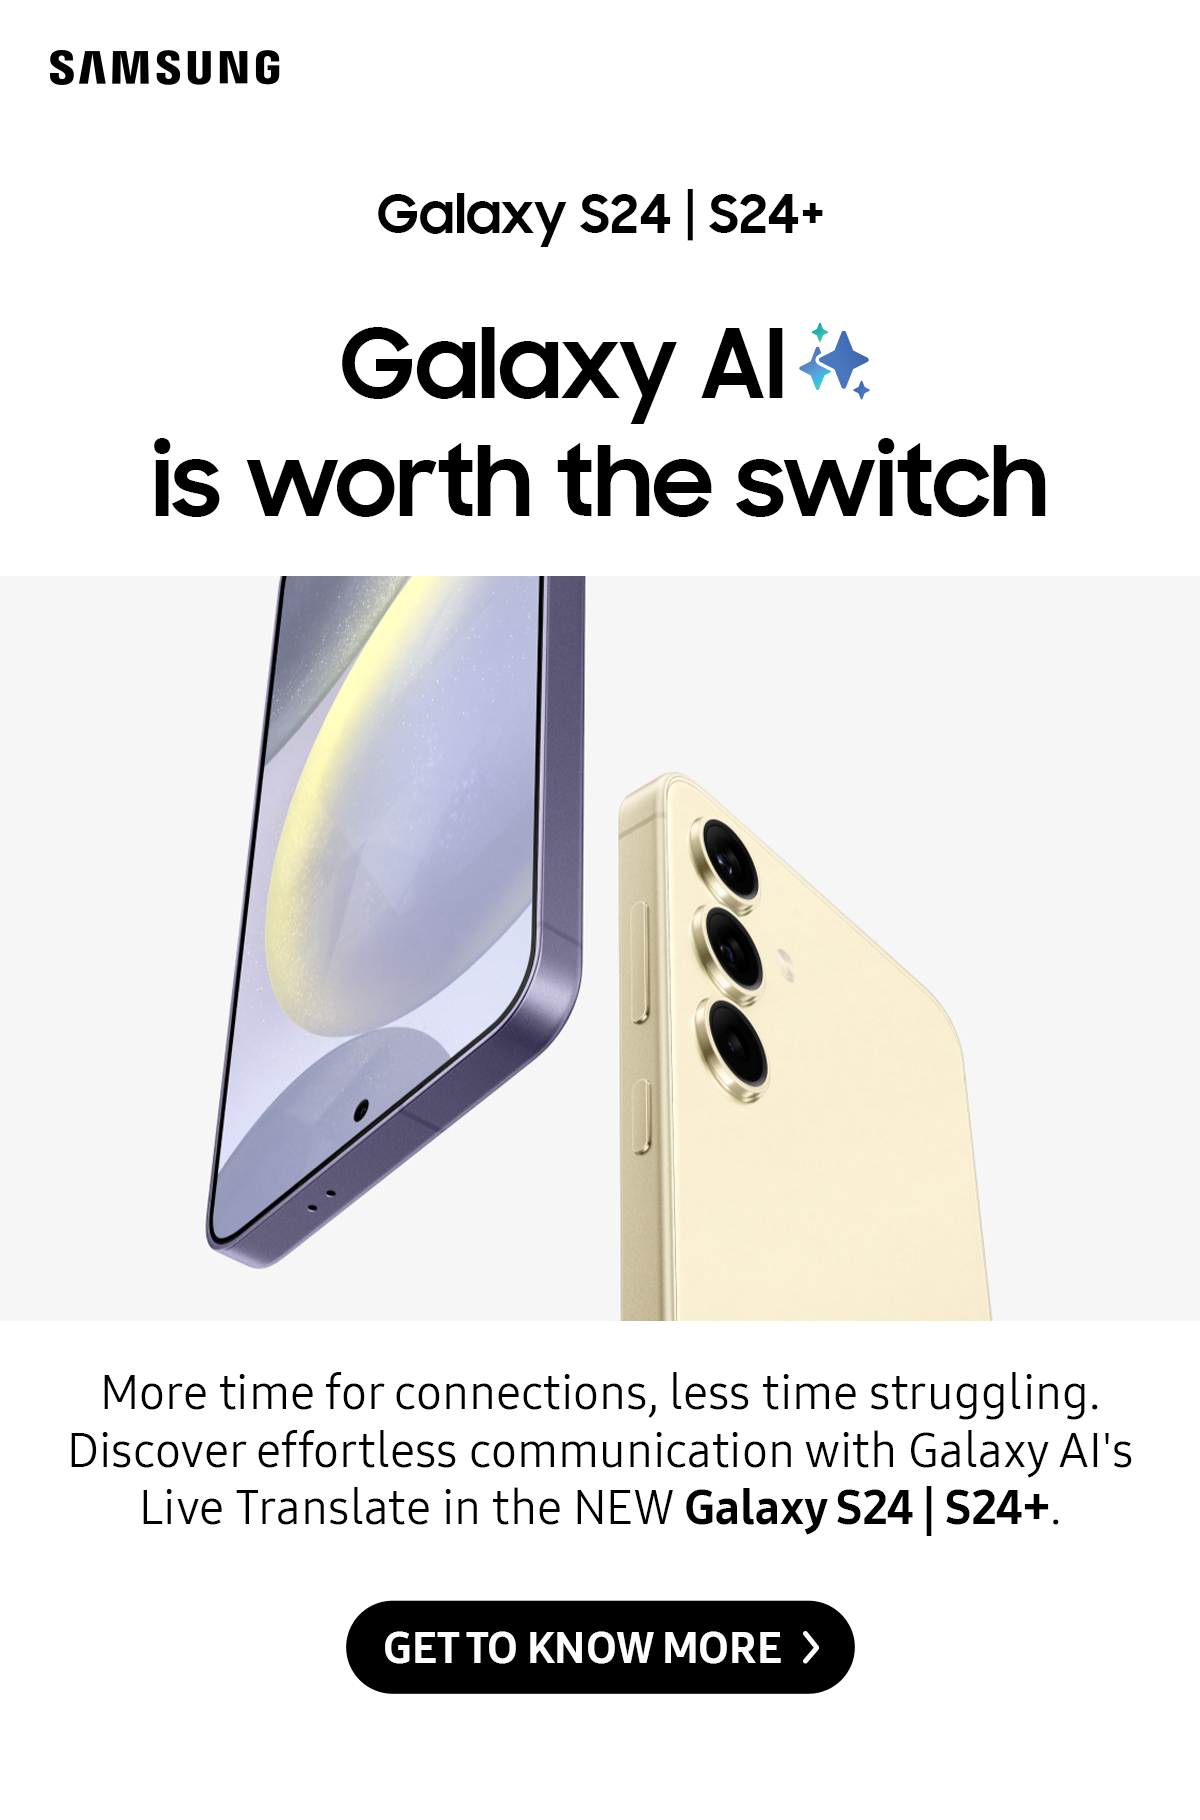 Galaxy AI is worth the switch | More time for connections, less time struggling. Discover effortless communication with Galaxy Al's Live Translate in the NEW Galaxy S24 Ultra.